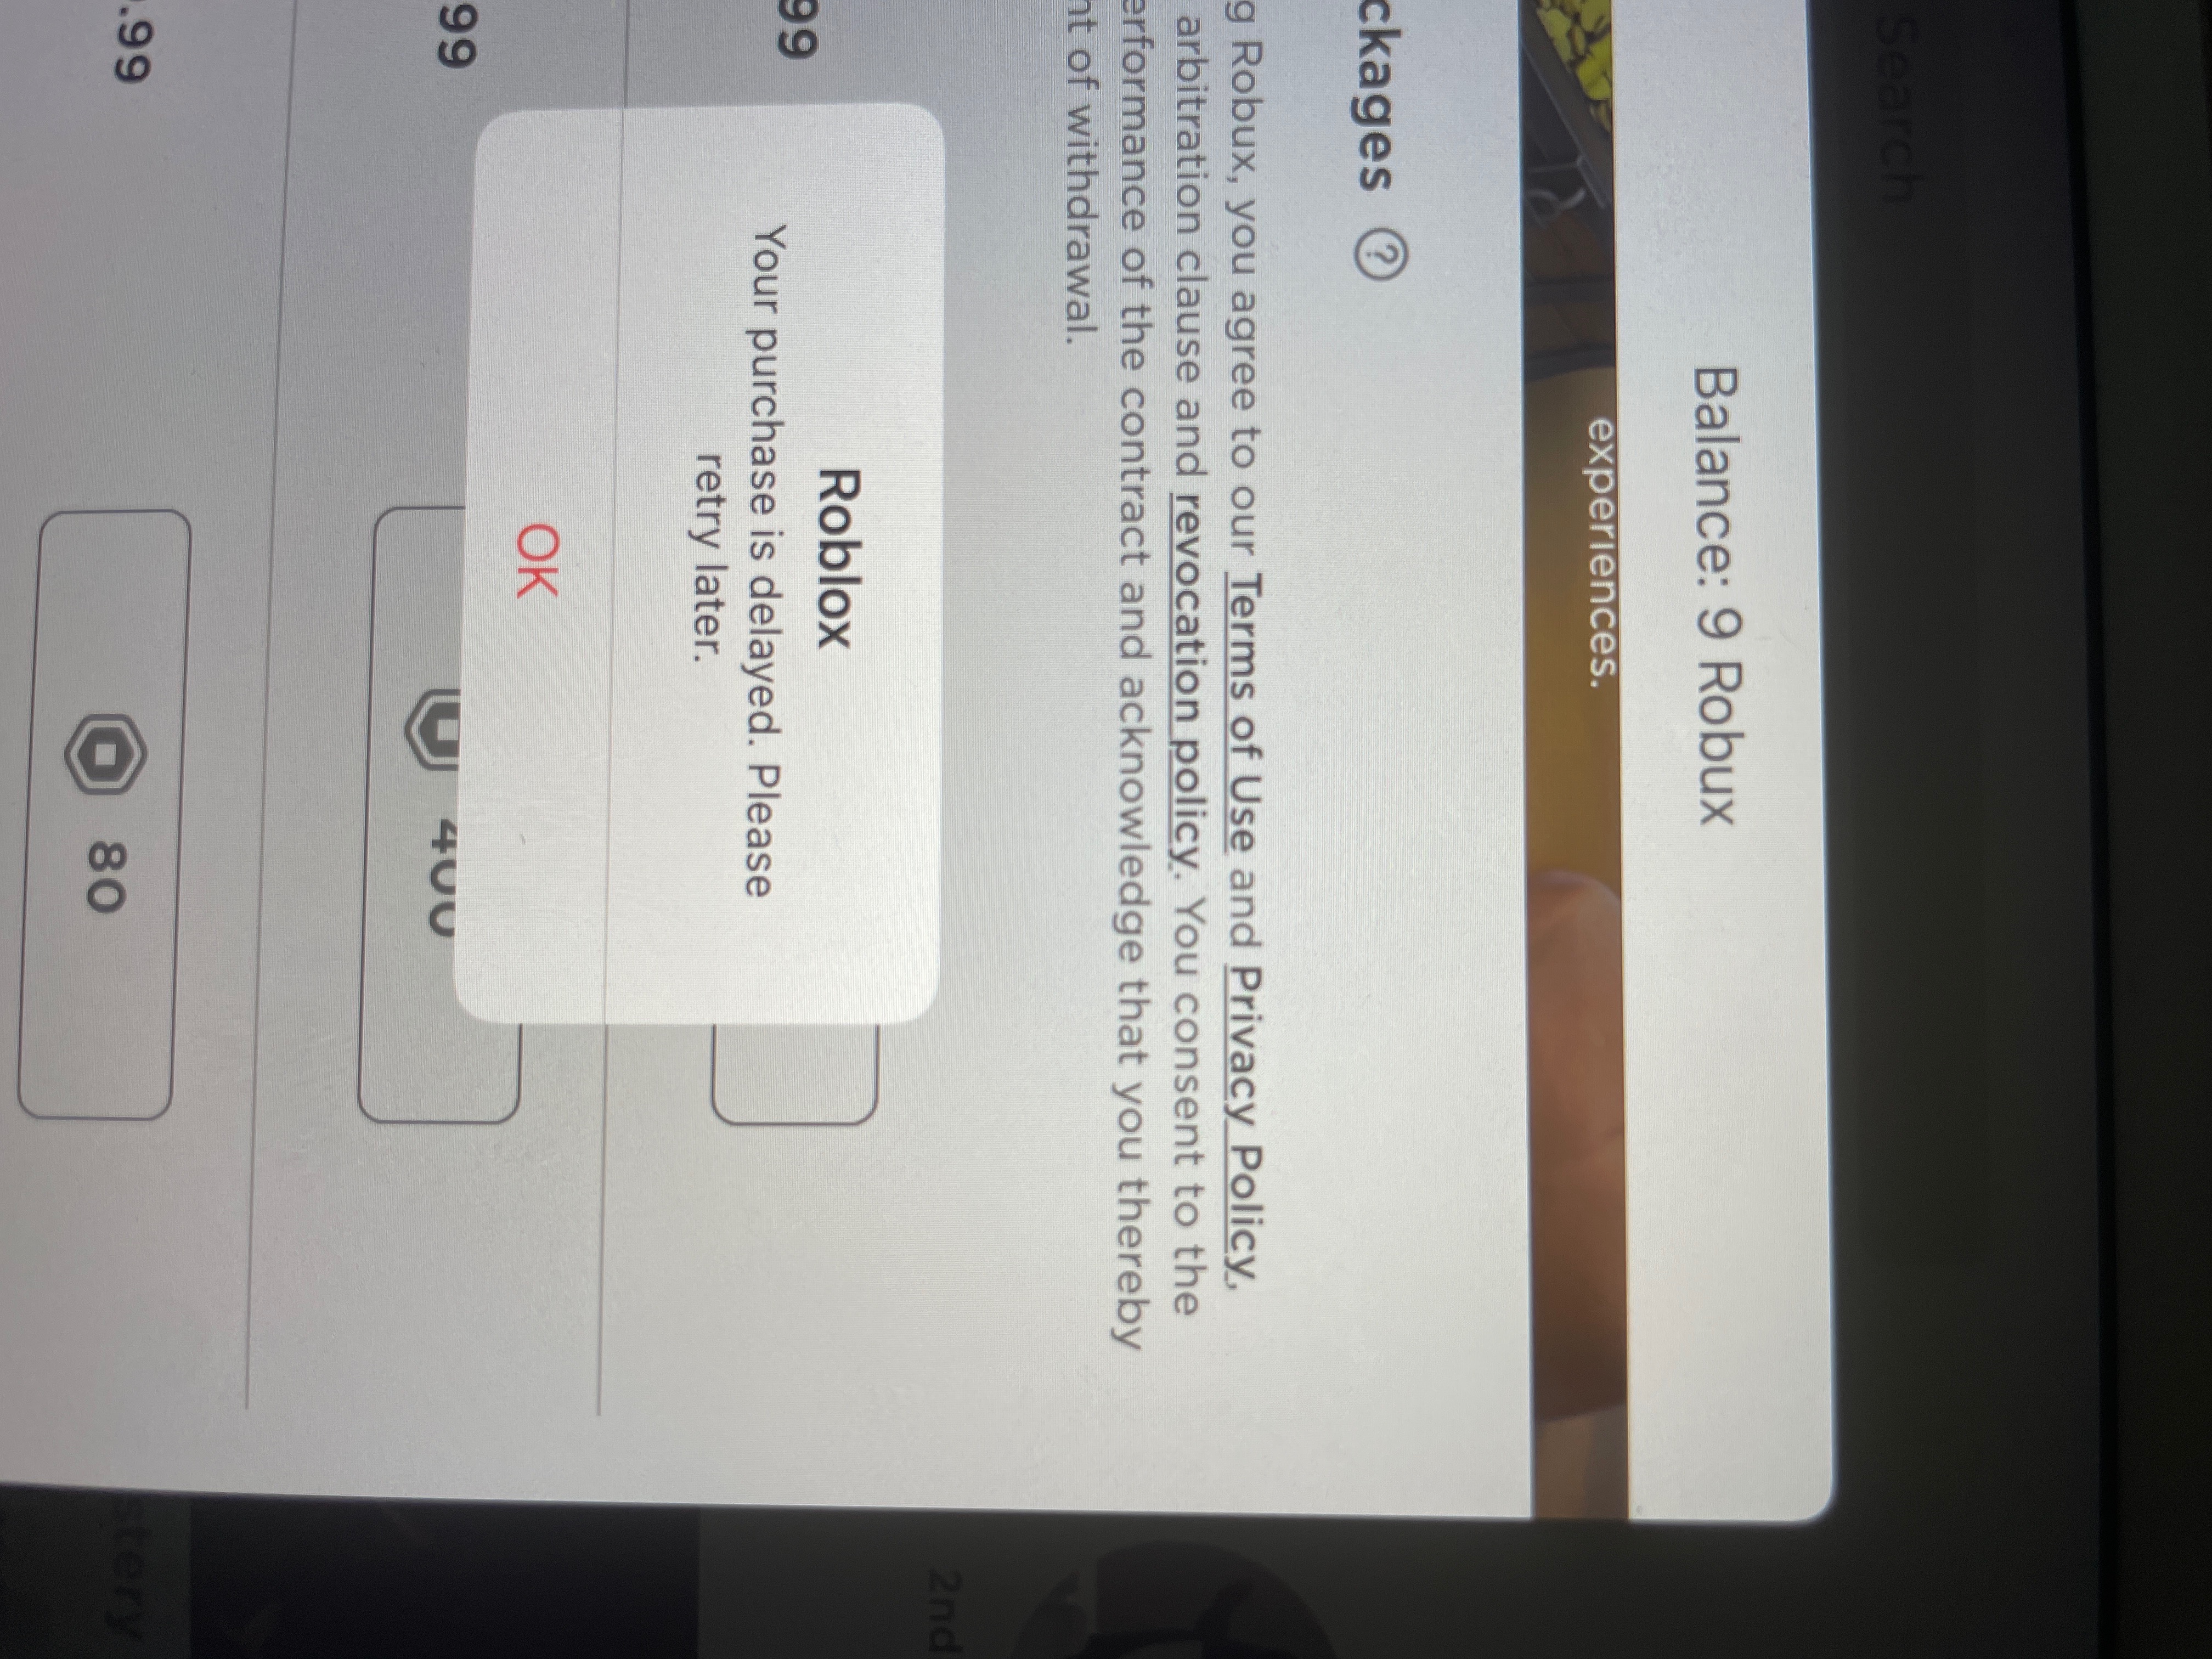 My Roblox purchase is delayed - Apple Community